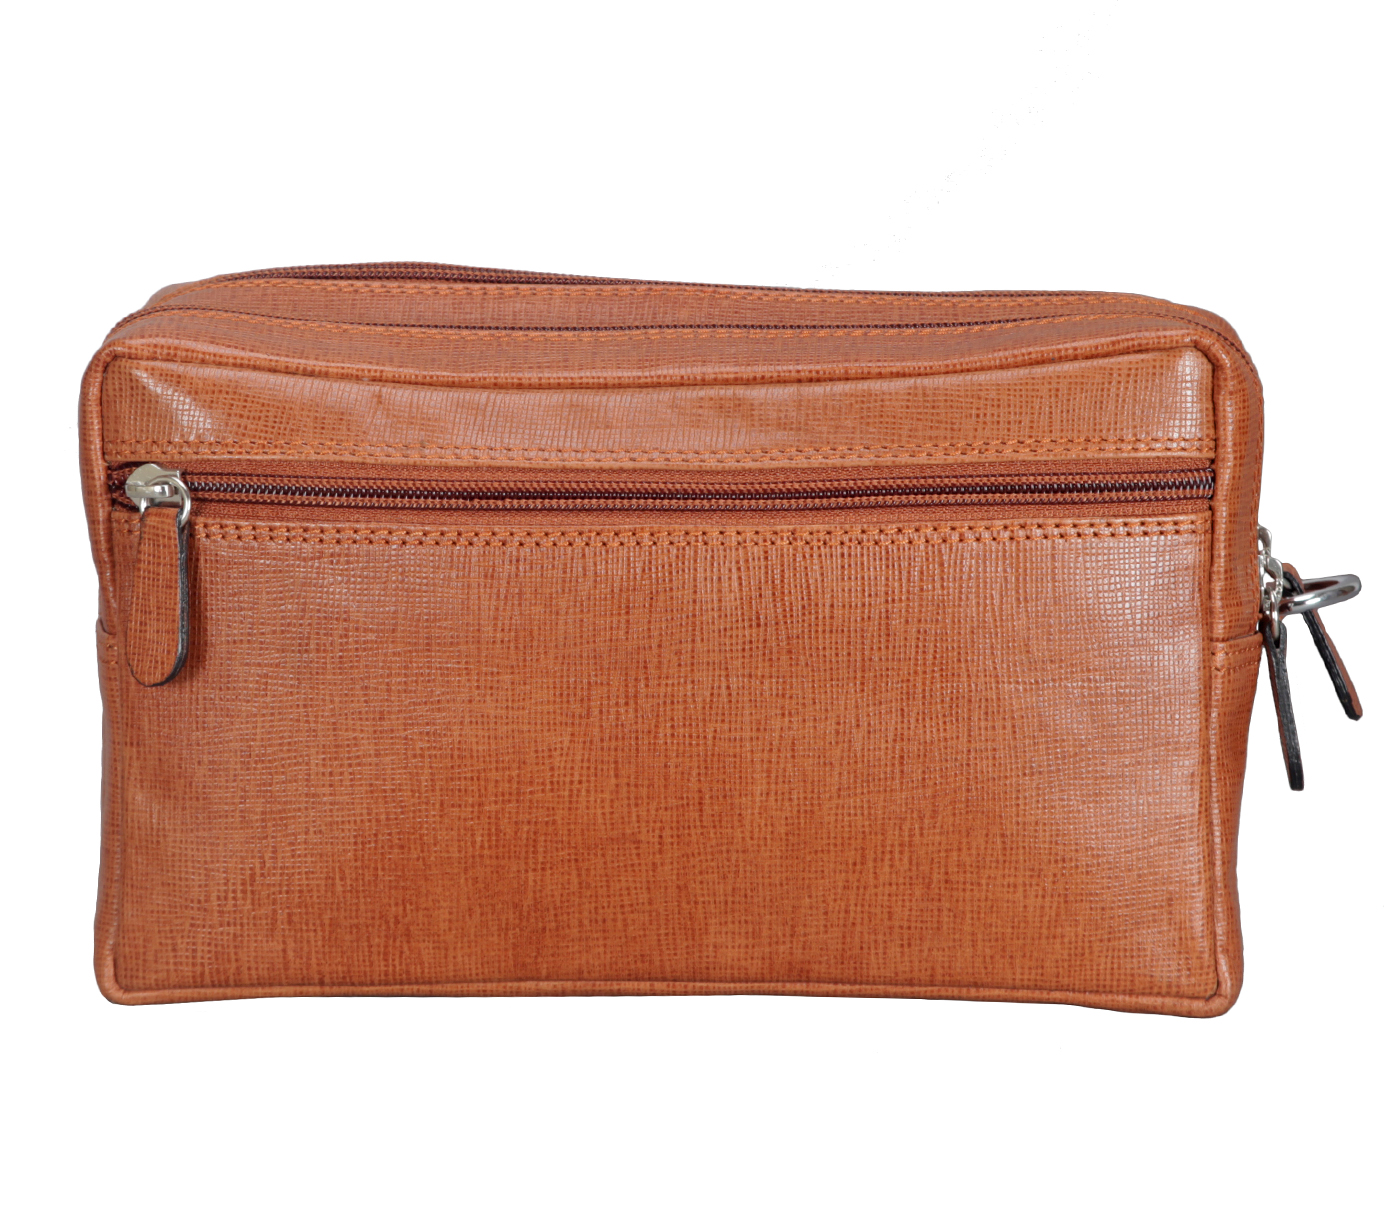 P35--Adamis Pure Leather Pouch for Men ( P35 ) - Tan